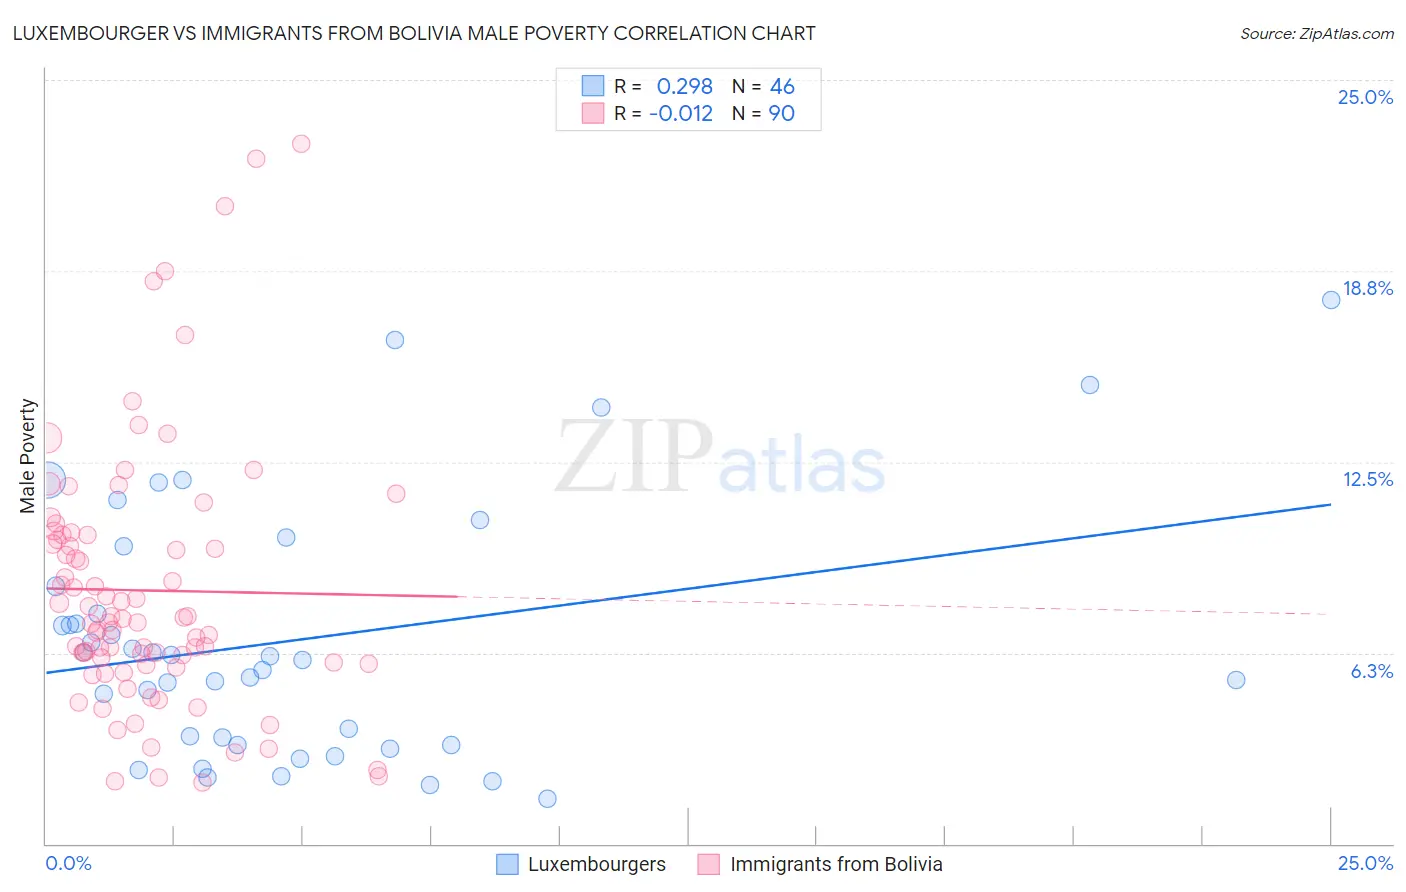 Luxembourger vs Immigrants from Bolivia Male Poverty